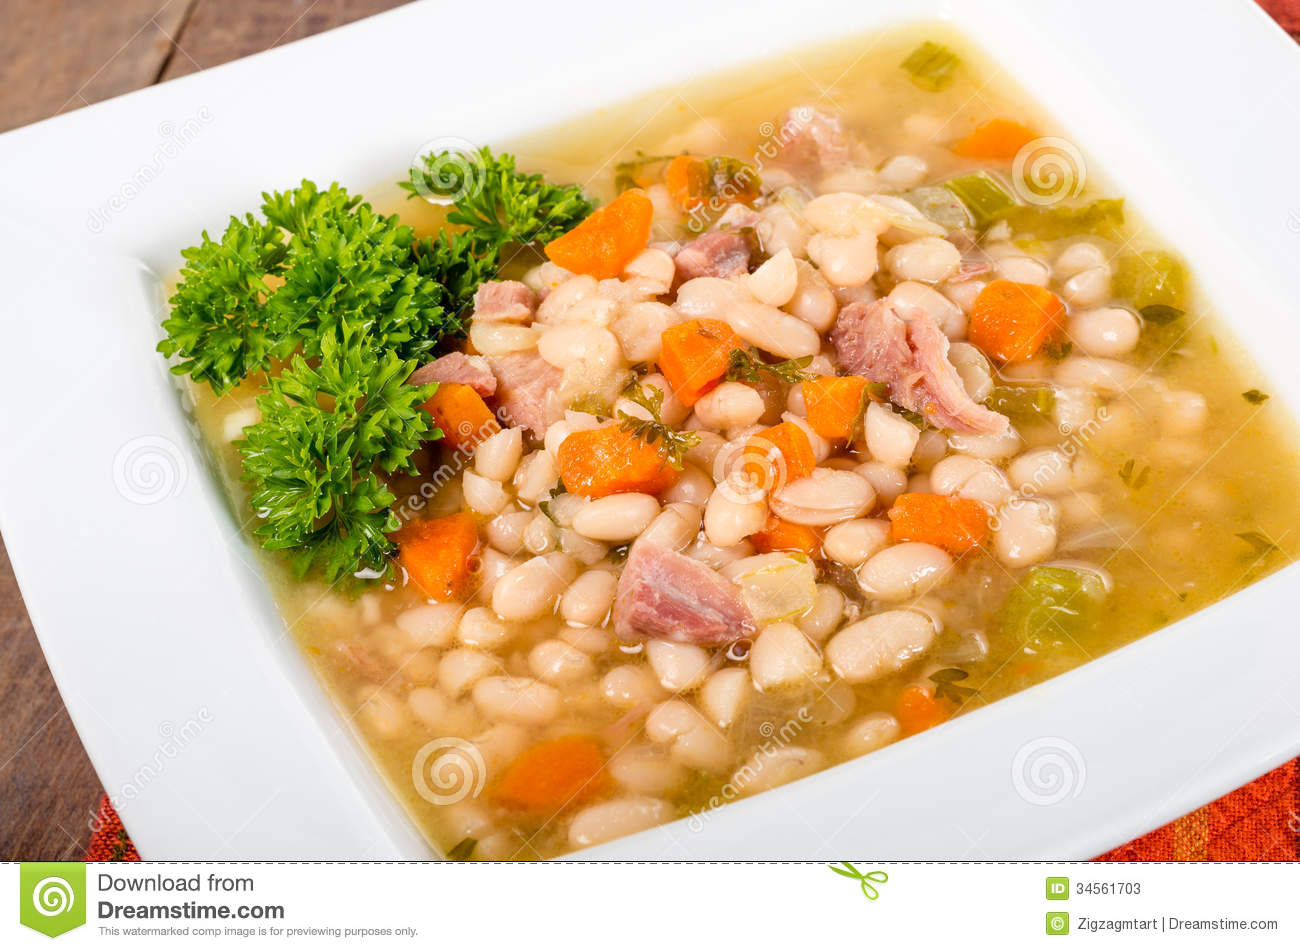 Ham And Bean Soup With Carrots Stock Photos   Image  34561703